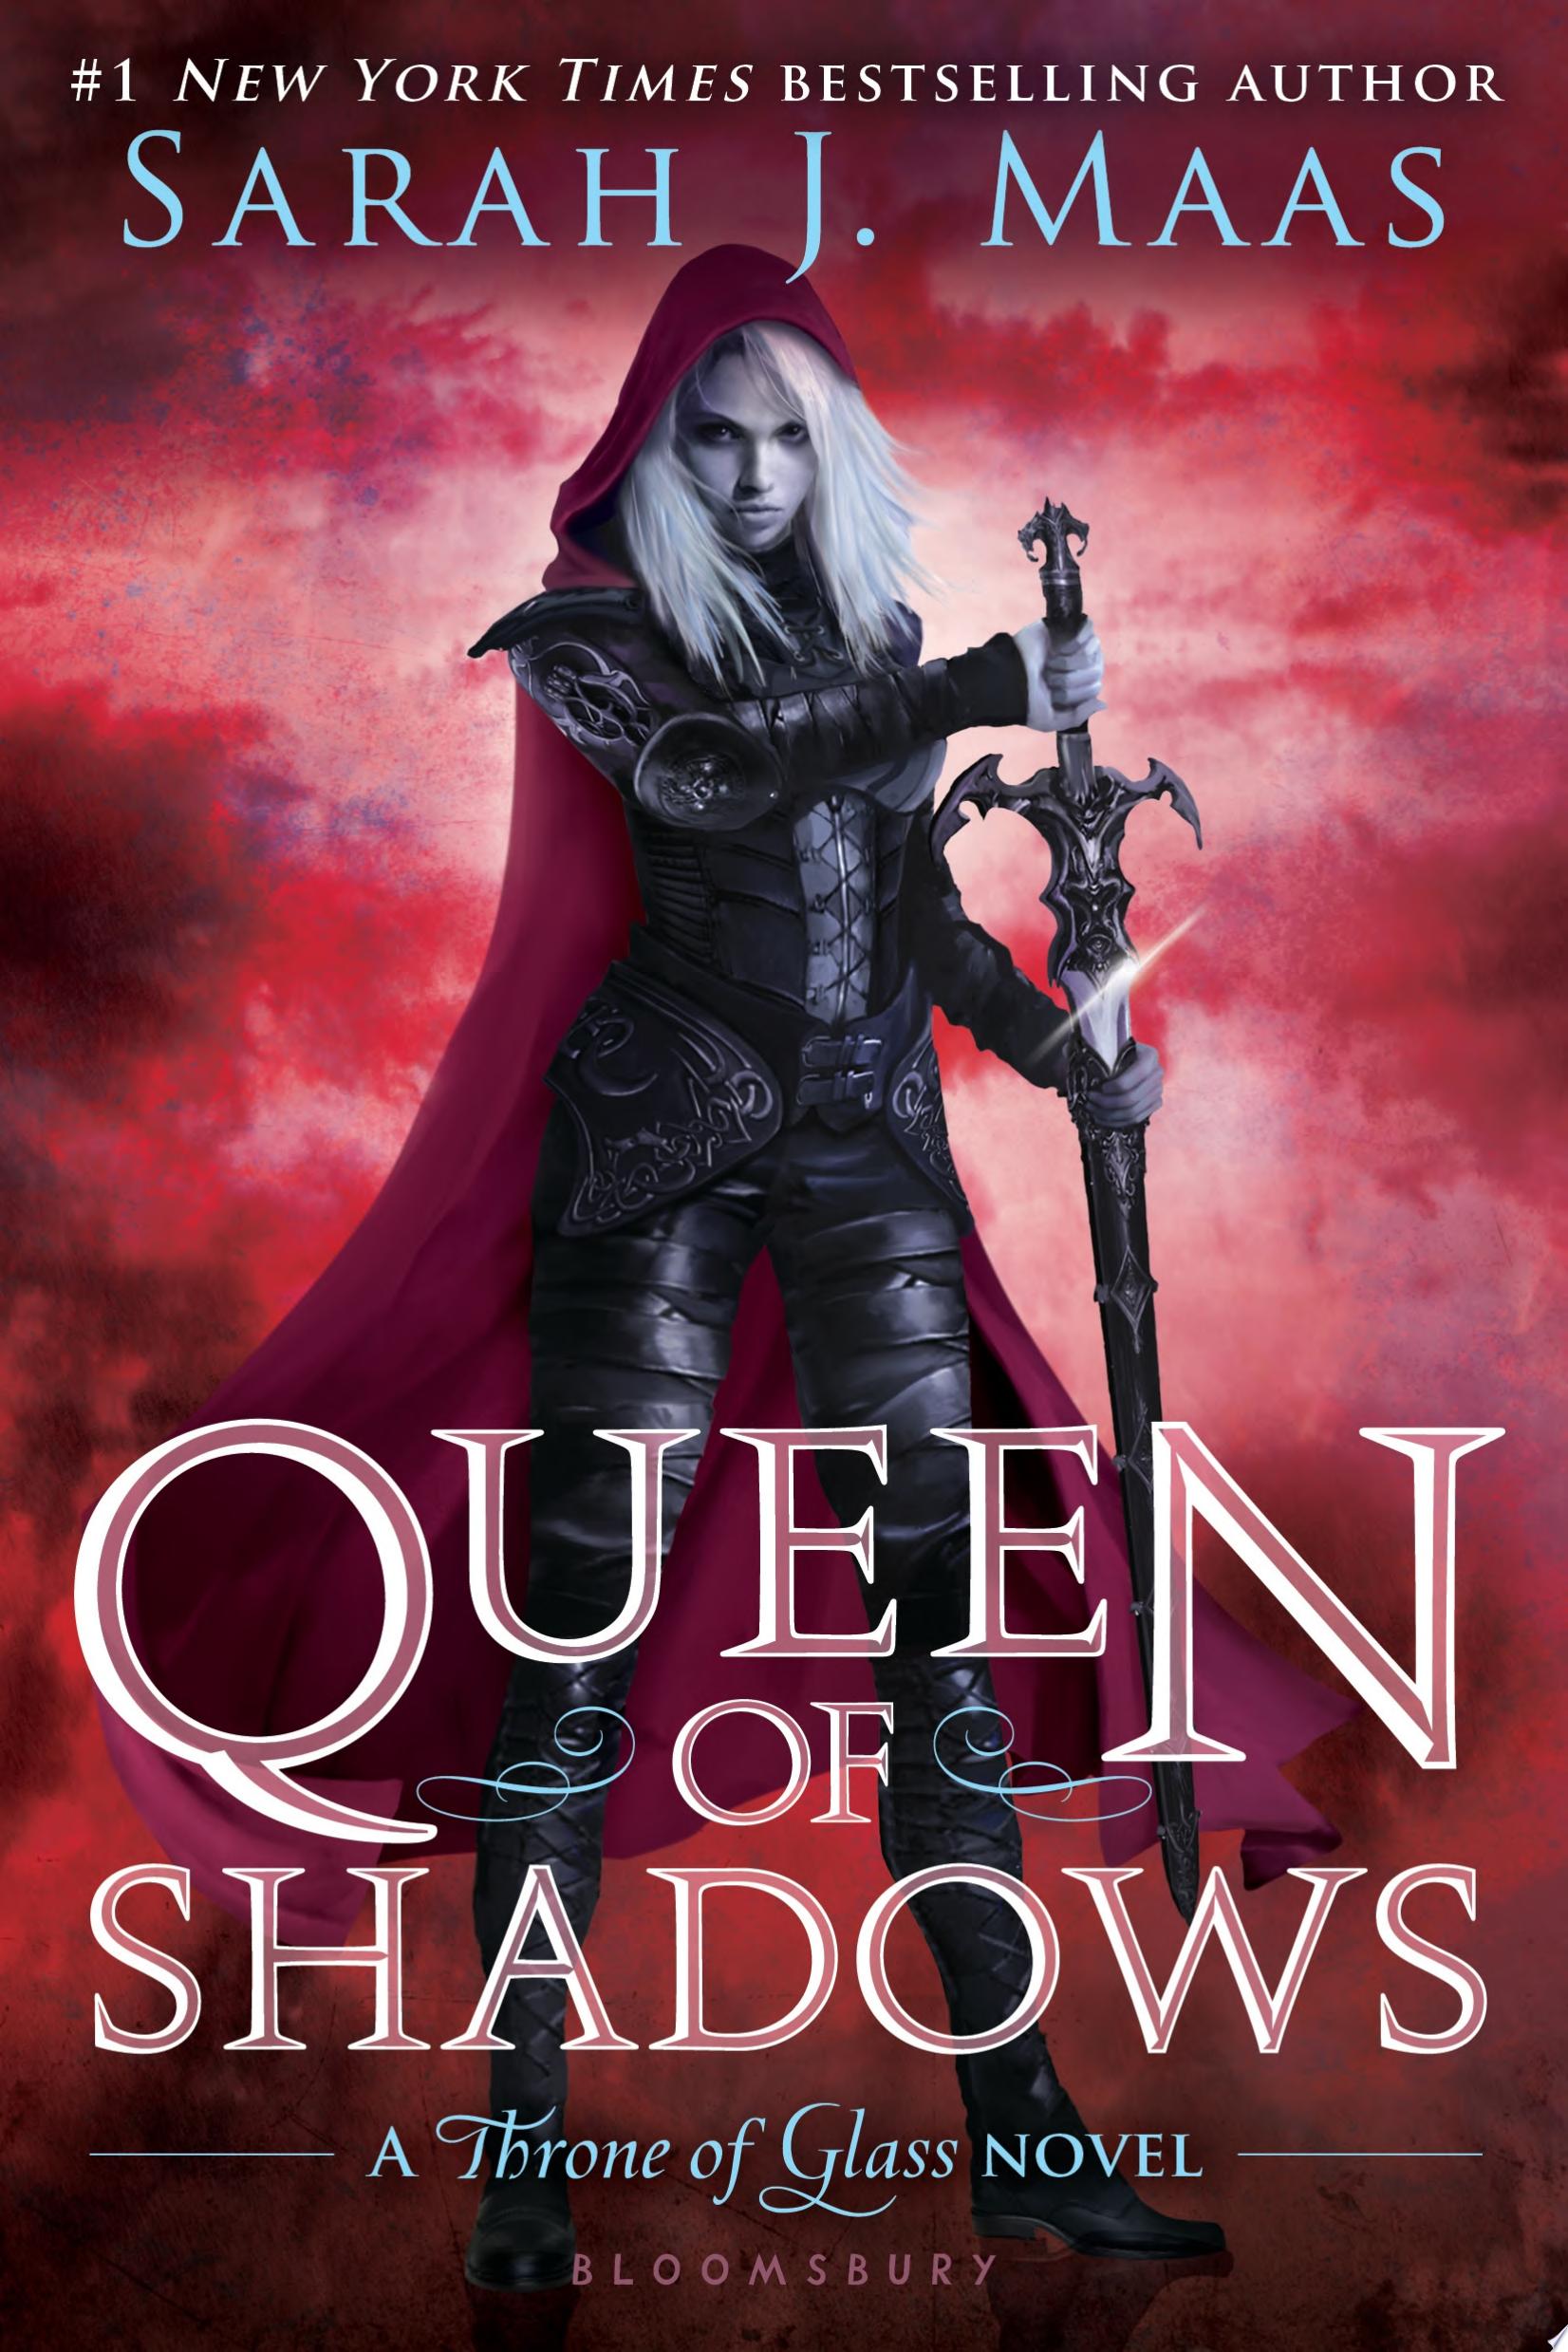 Image for "Queen of Shadows"